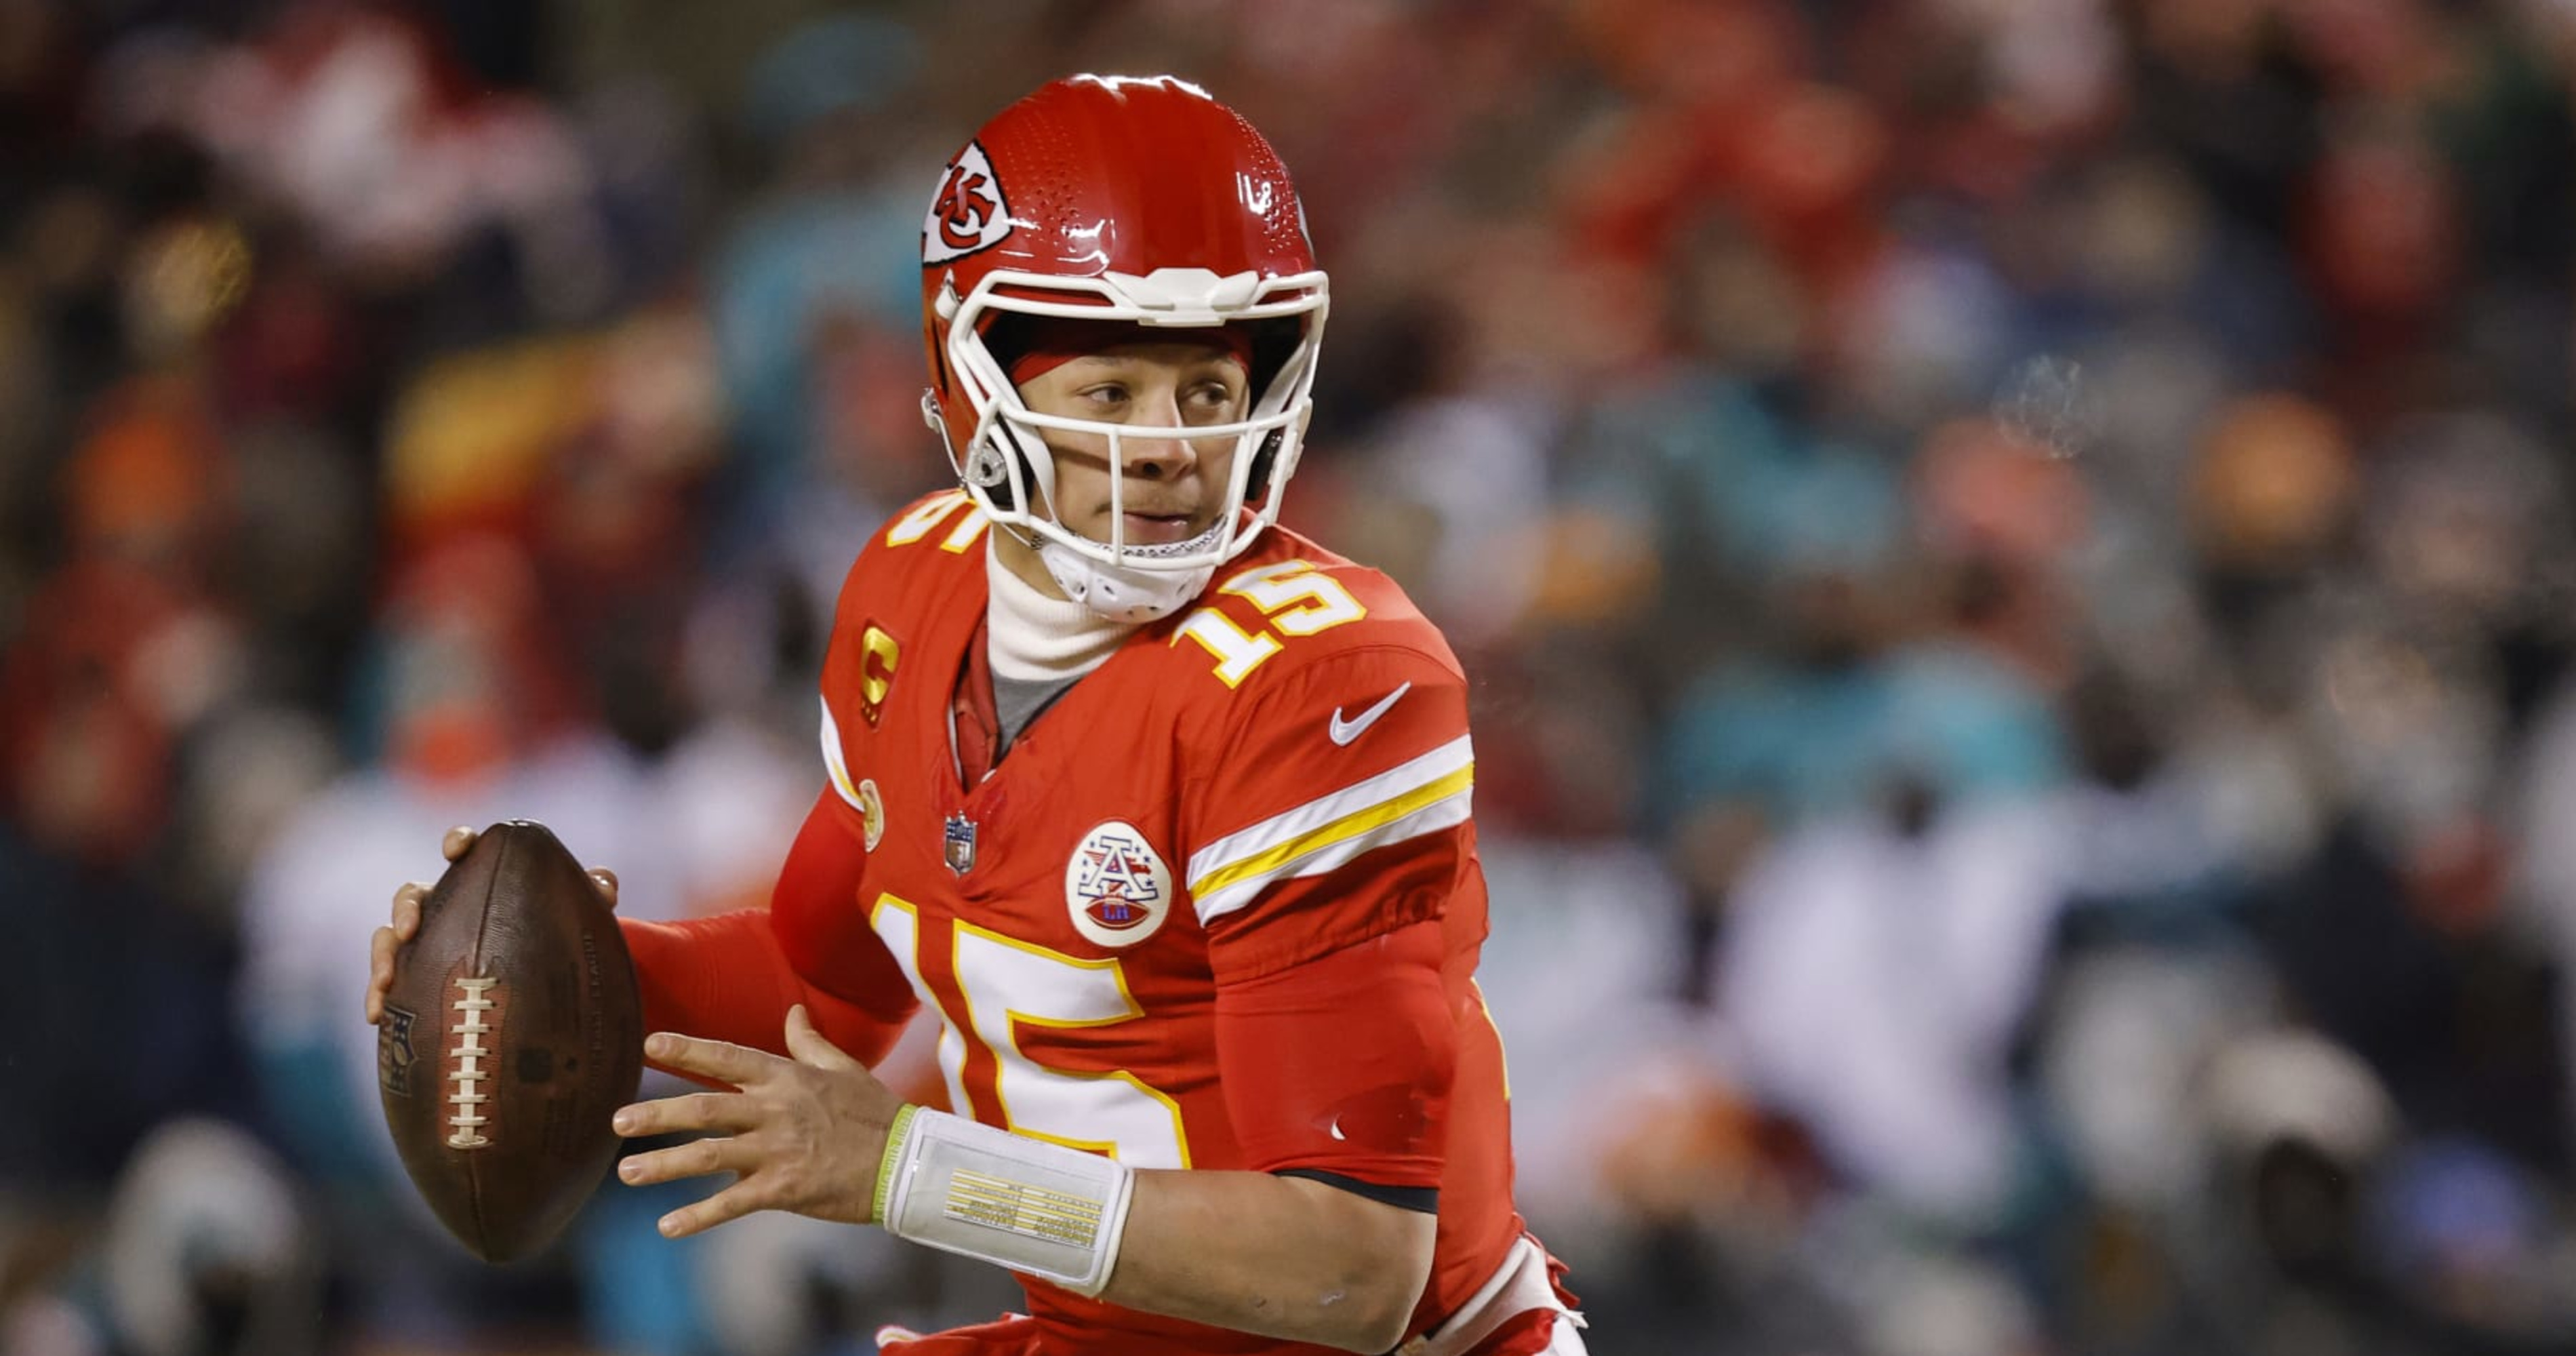 Chiefs' Patrick Mahomes has helmet shattered during playoff game